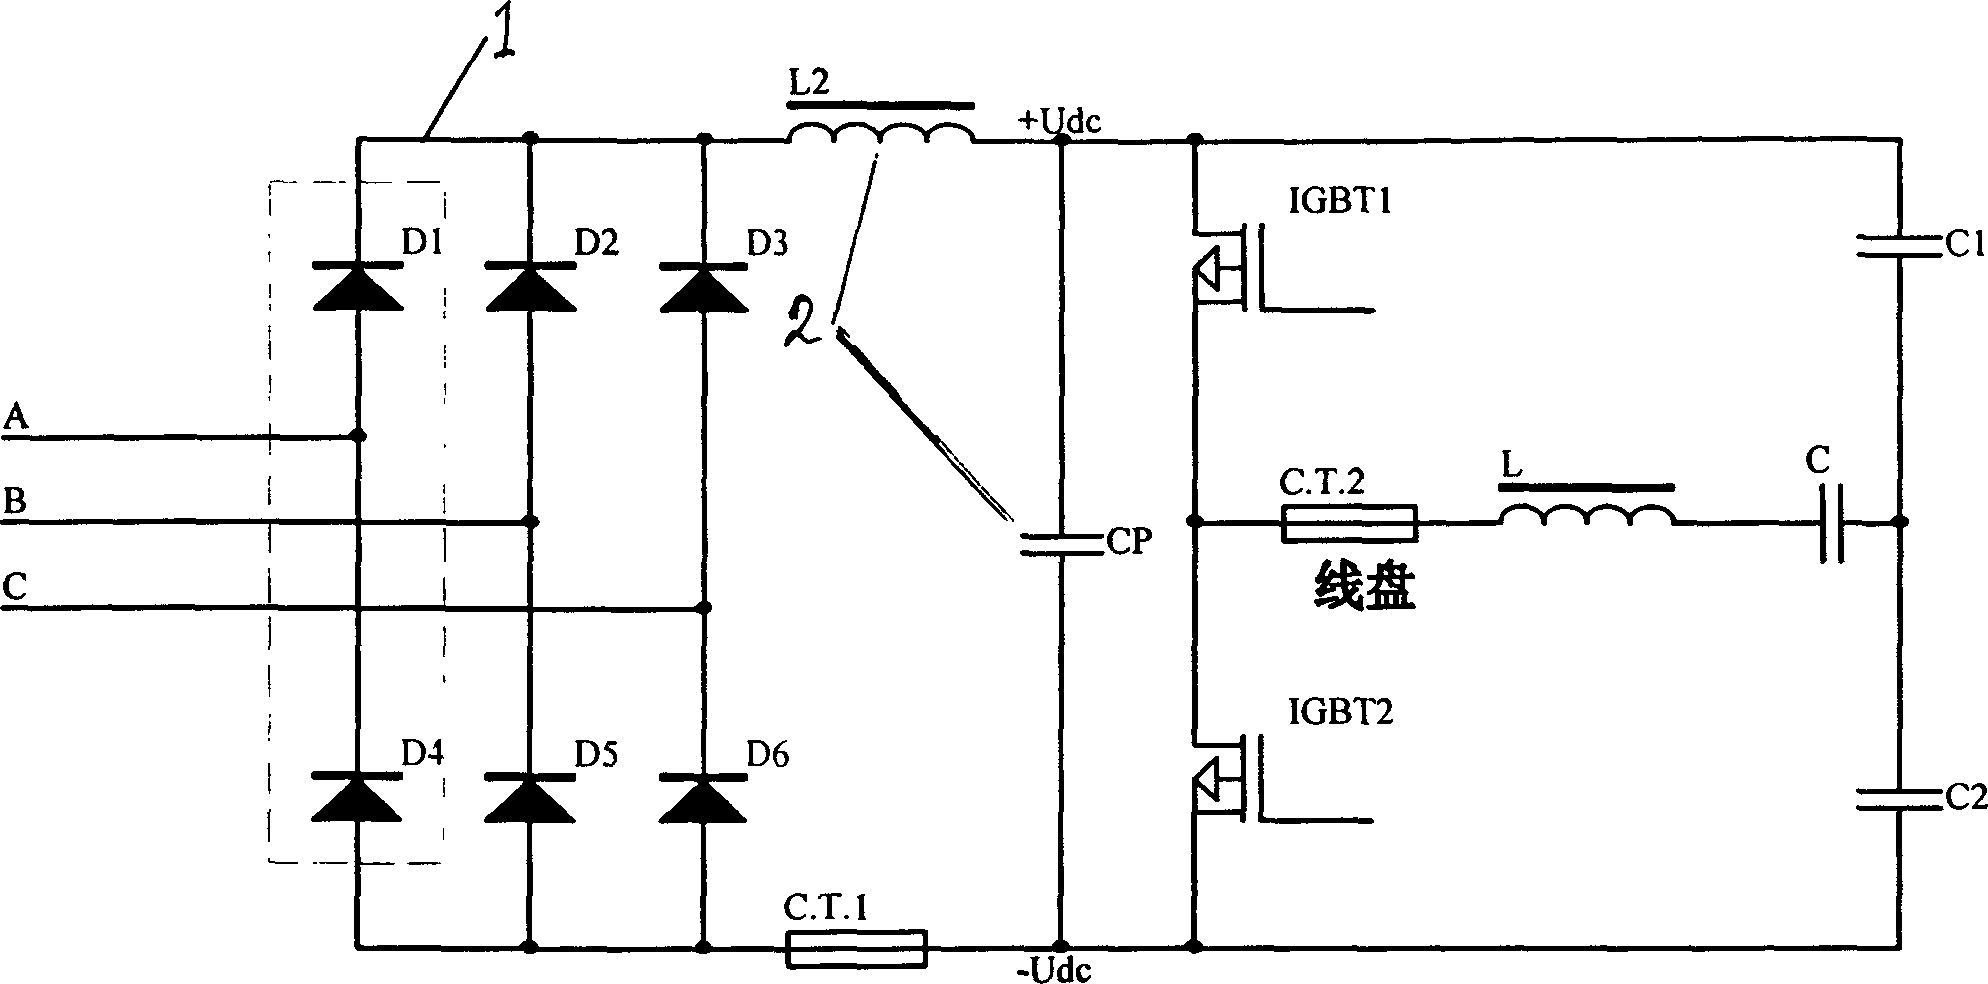 High power electromagnetic oven output power control device